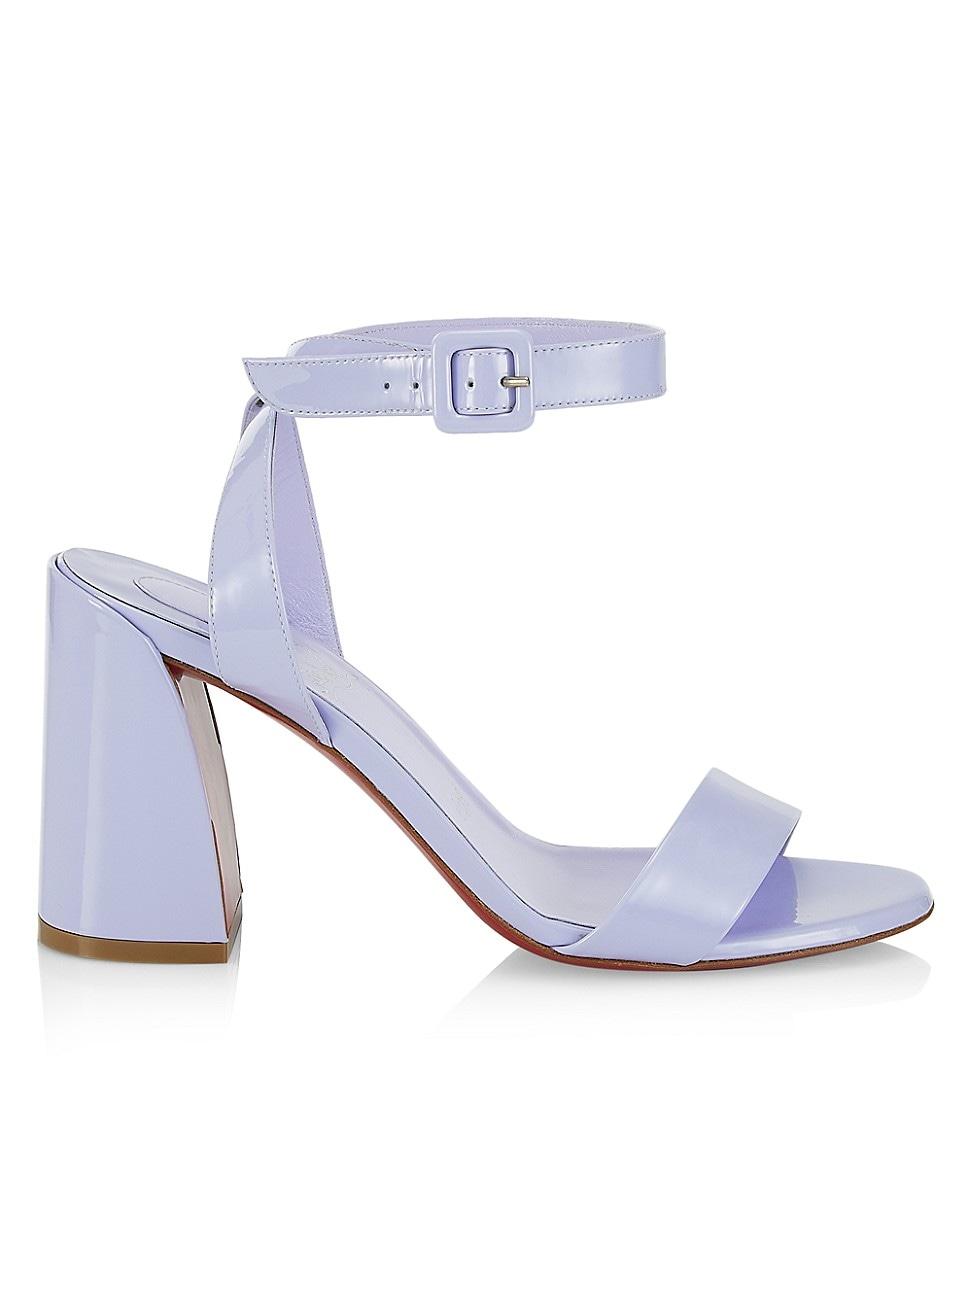 Christian Louboutin Miss Sabina 85 Patent Leather Sandals in White | Lyst